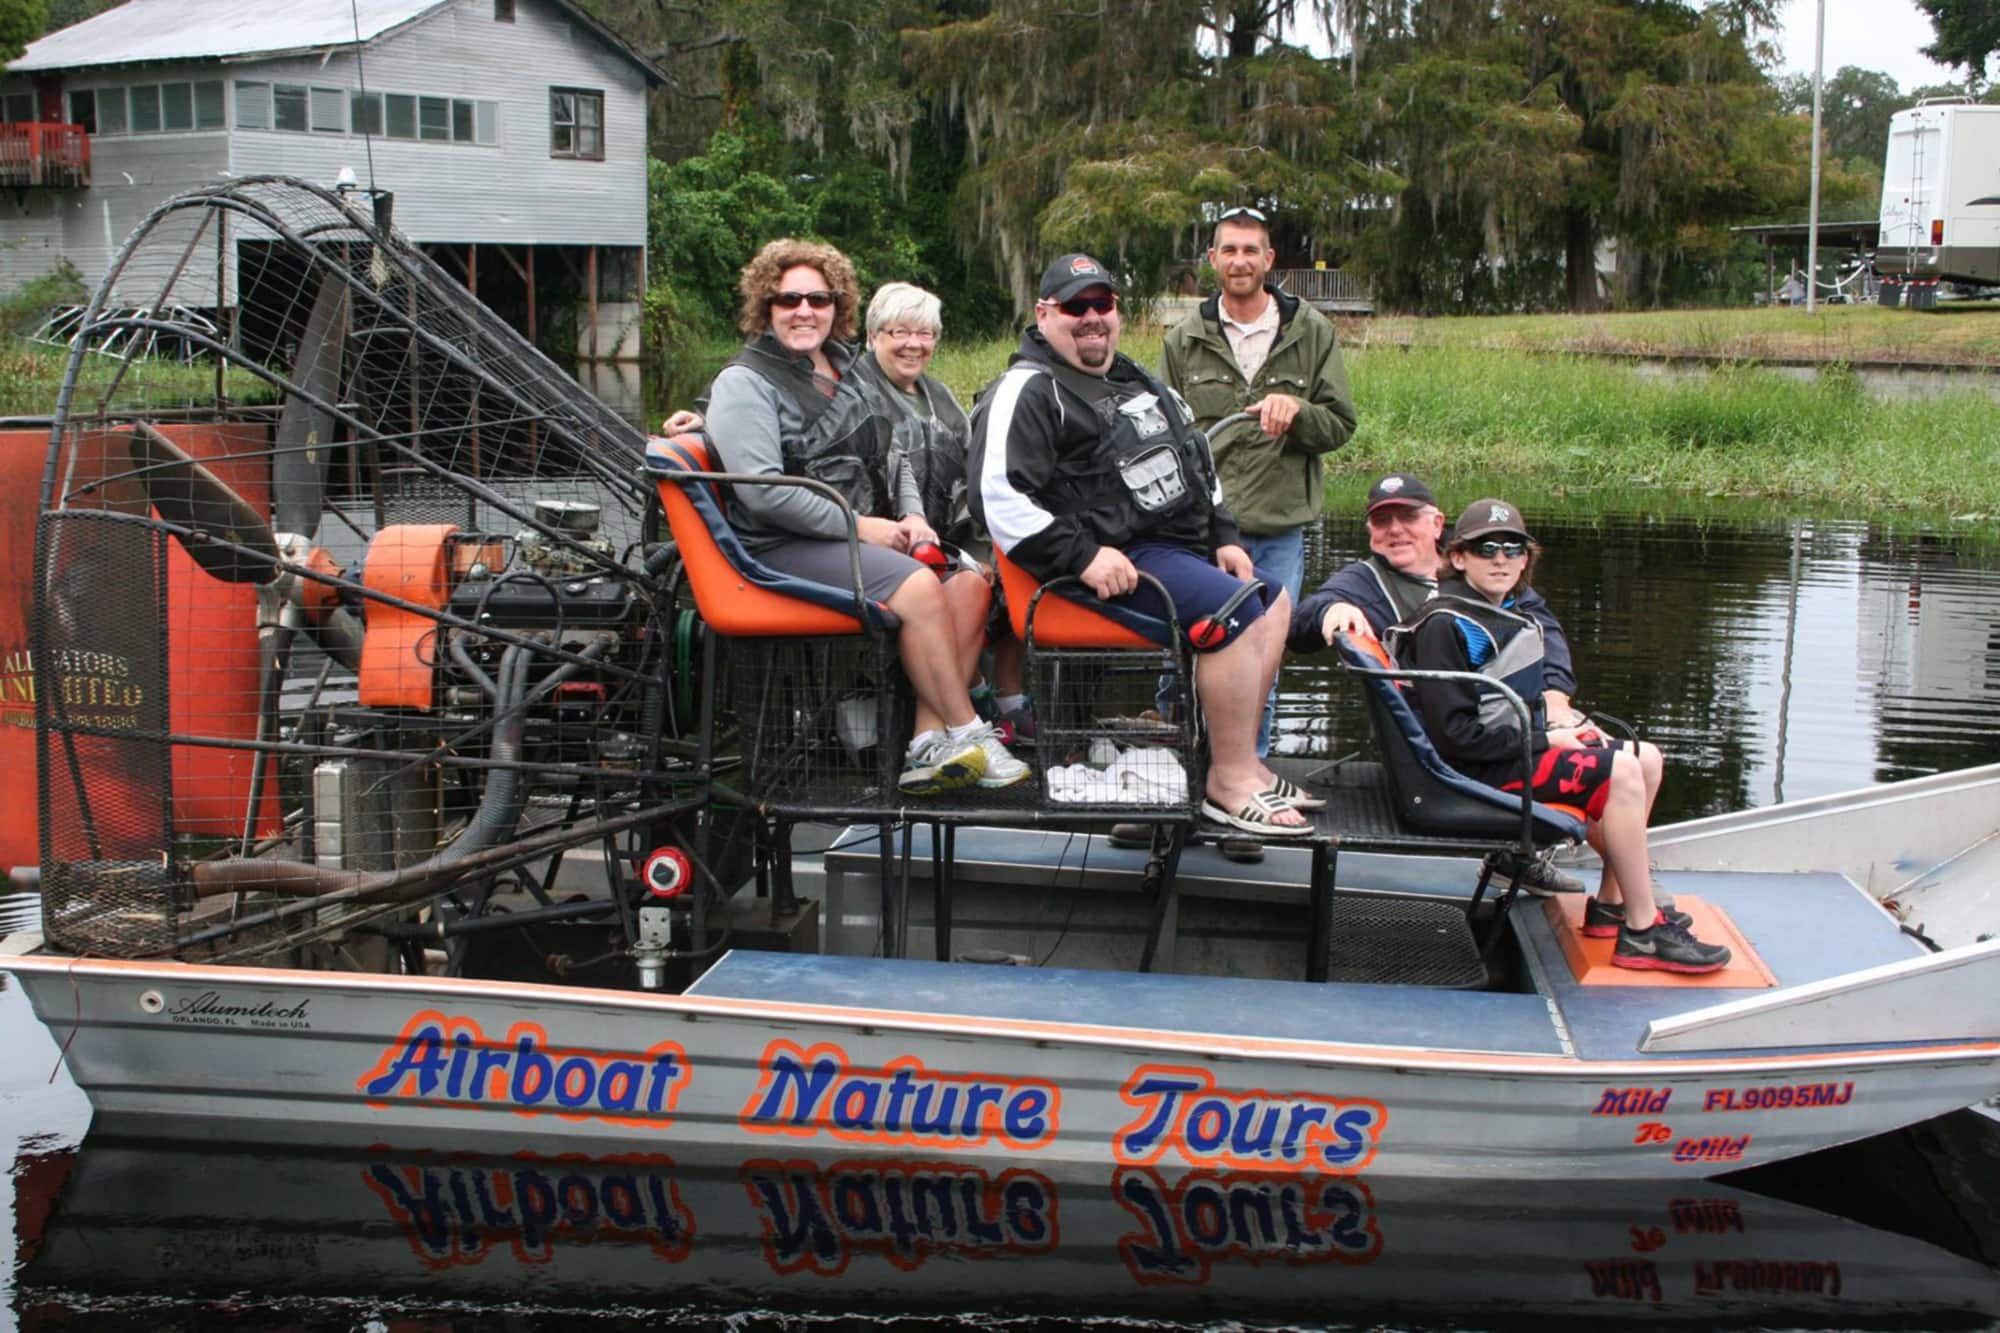 Group and airboat captain on boat before tour with Alligators Unlimited Airboat Tours